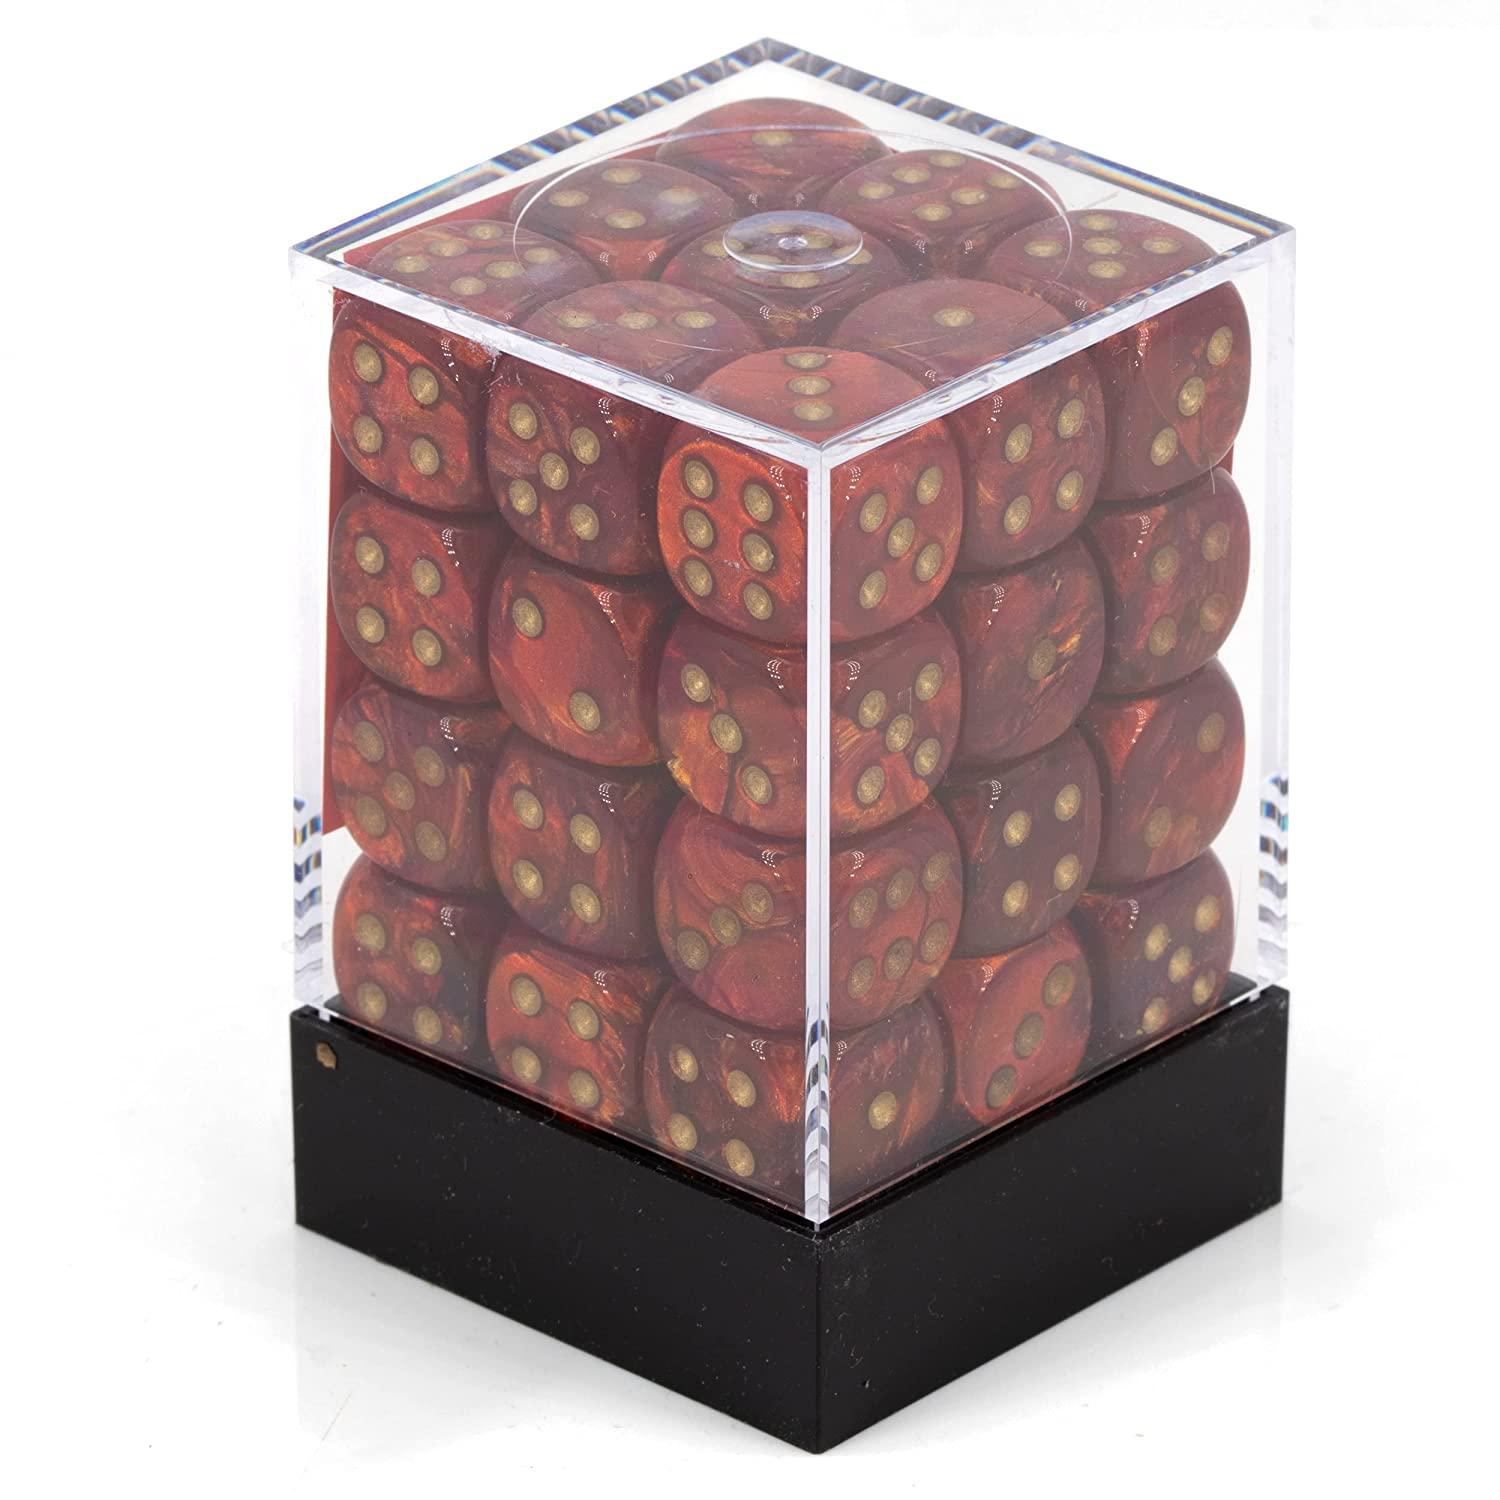 Chessex Dice d6 Sets: Scarab Scarlet with Gold - 12mm Six Sided